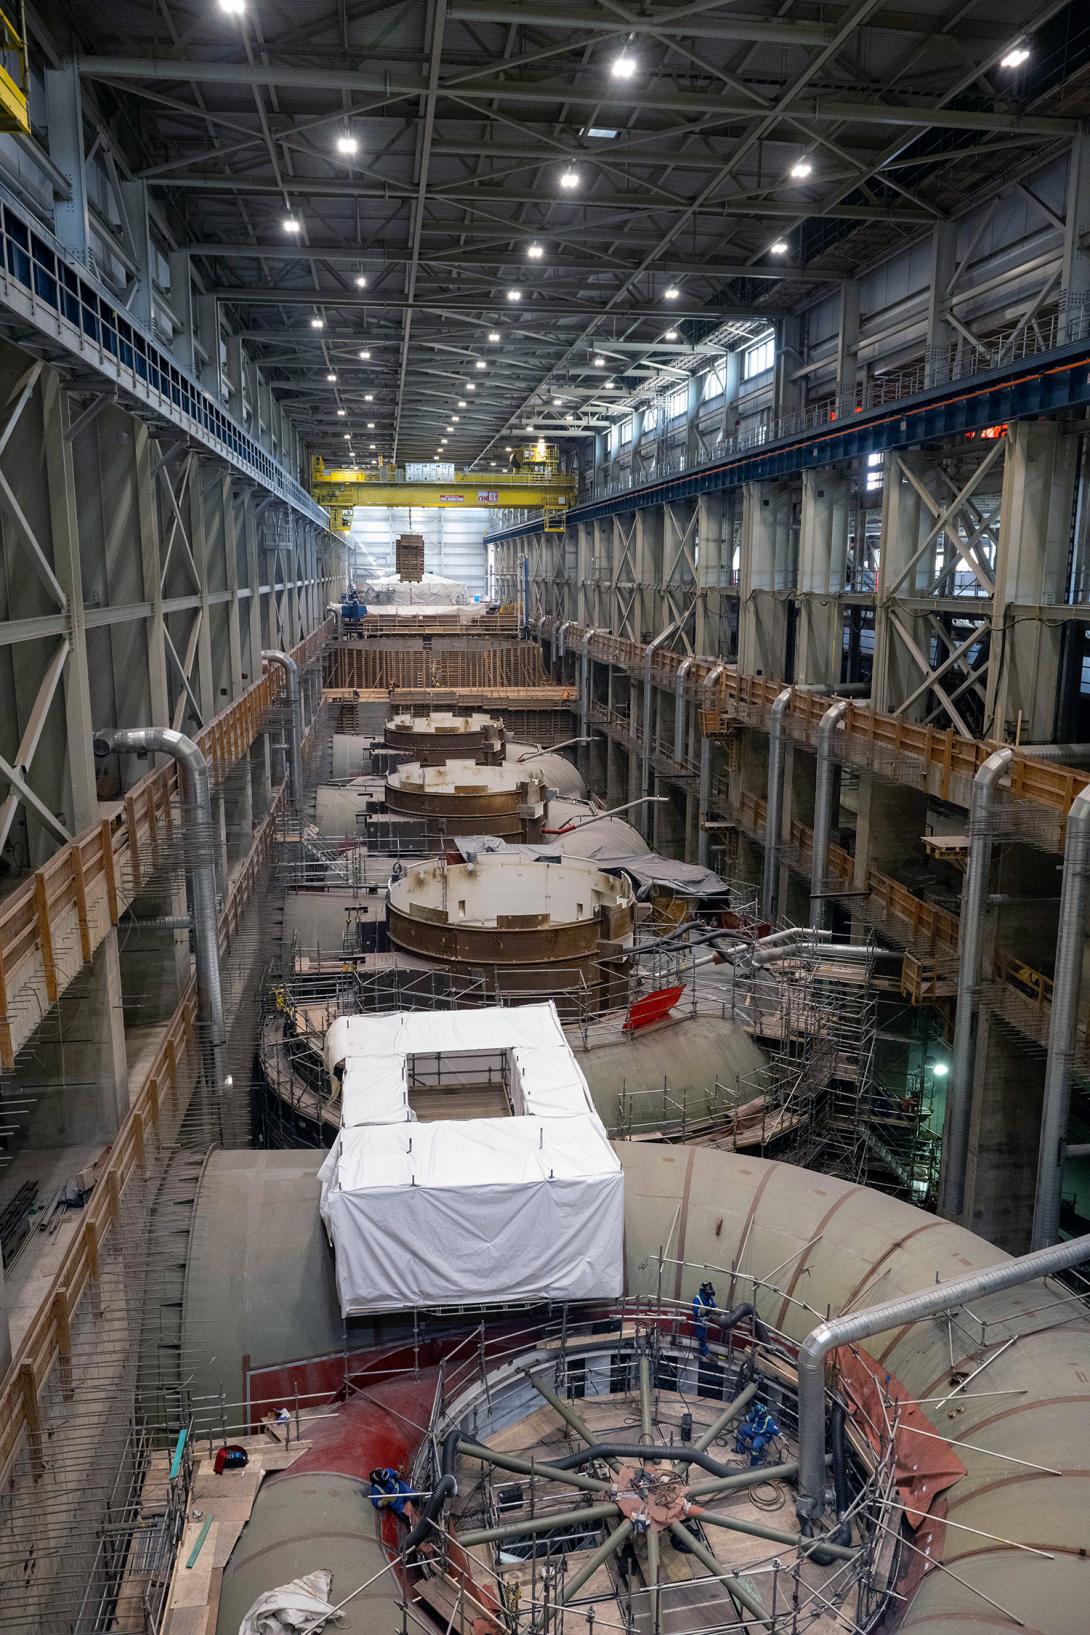 Units 6 to 1 inside the powerhouse are in varying stages of construction. | June 2022